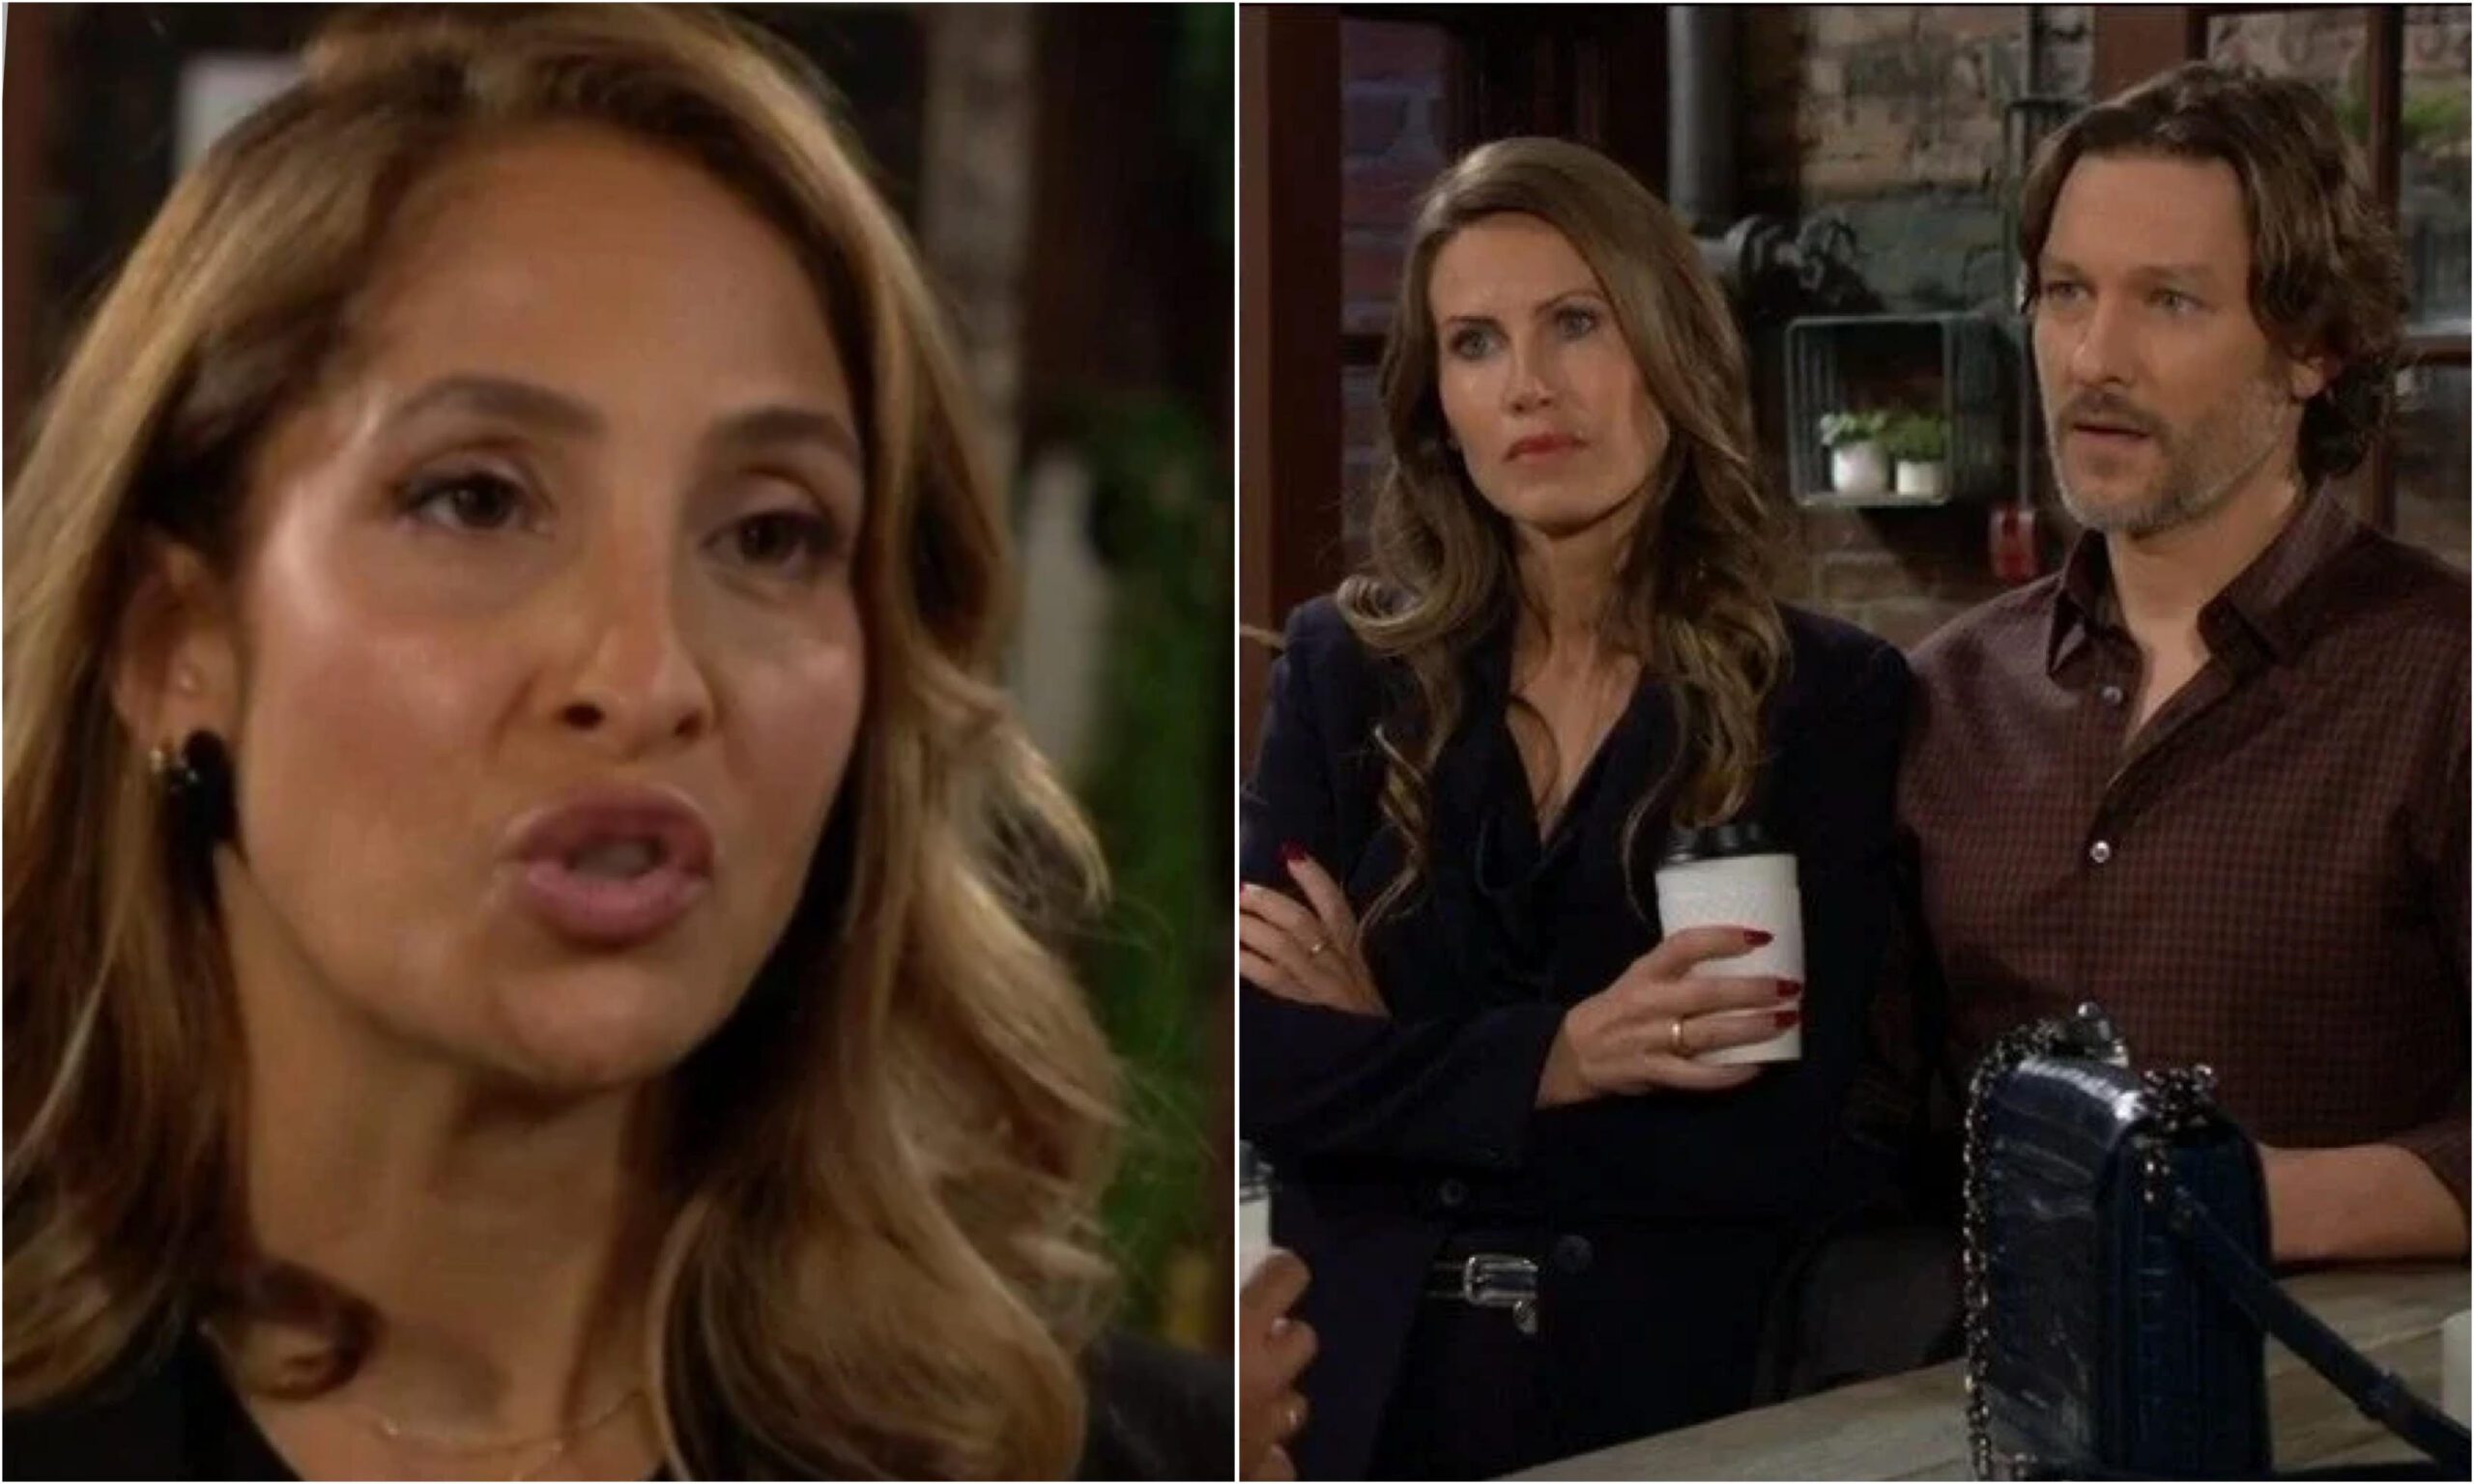 The Young and the Restless spoilers Lily Winters Daniel Romalotti Jr. and Heather Stevens